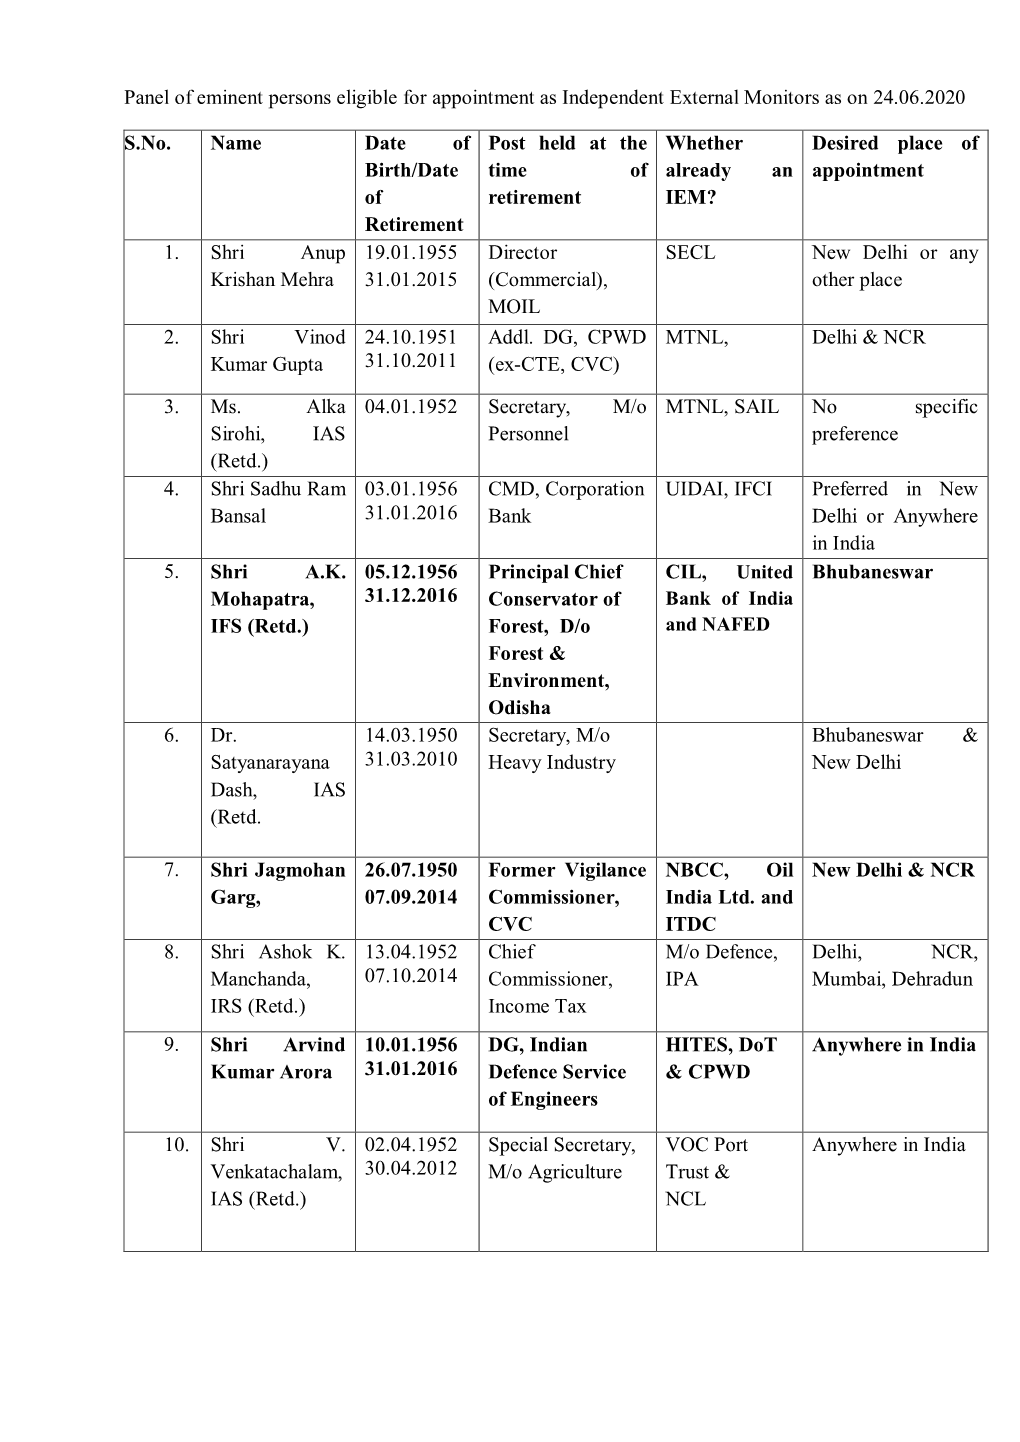 Panel of Eminent Persons Eligible for Appointment As Independent External Monitors As on 24.06.2020 S.No. Name Date of Birth/Da